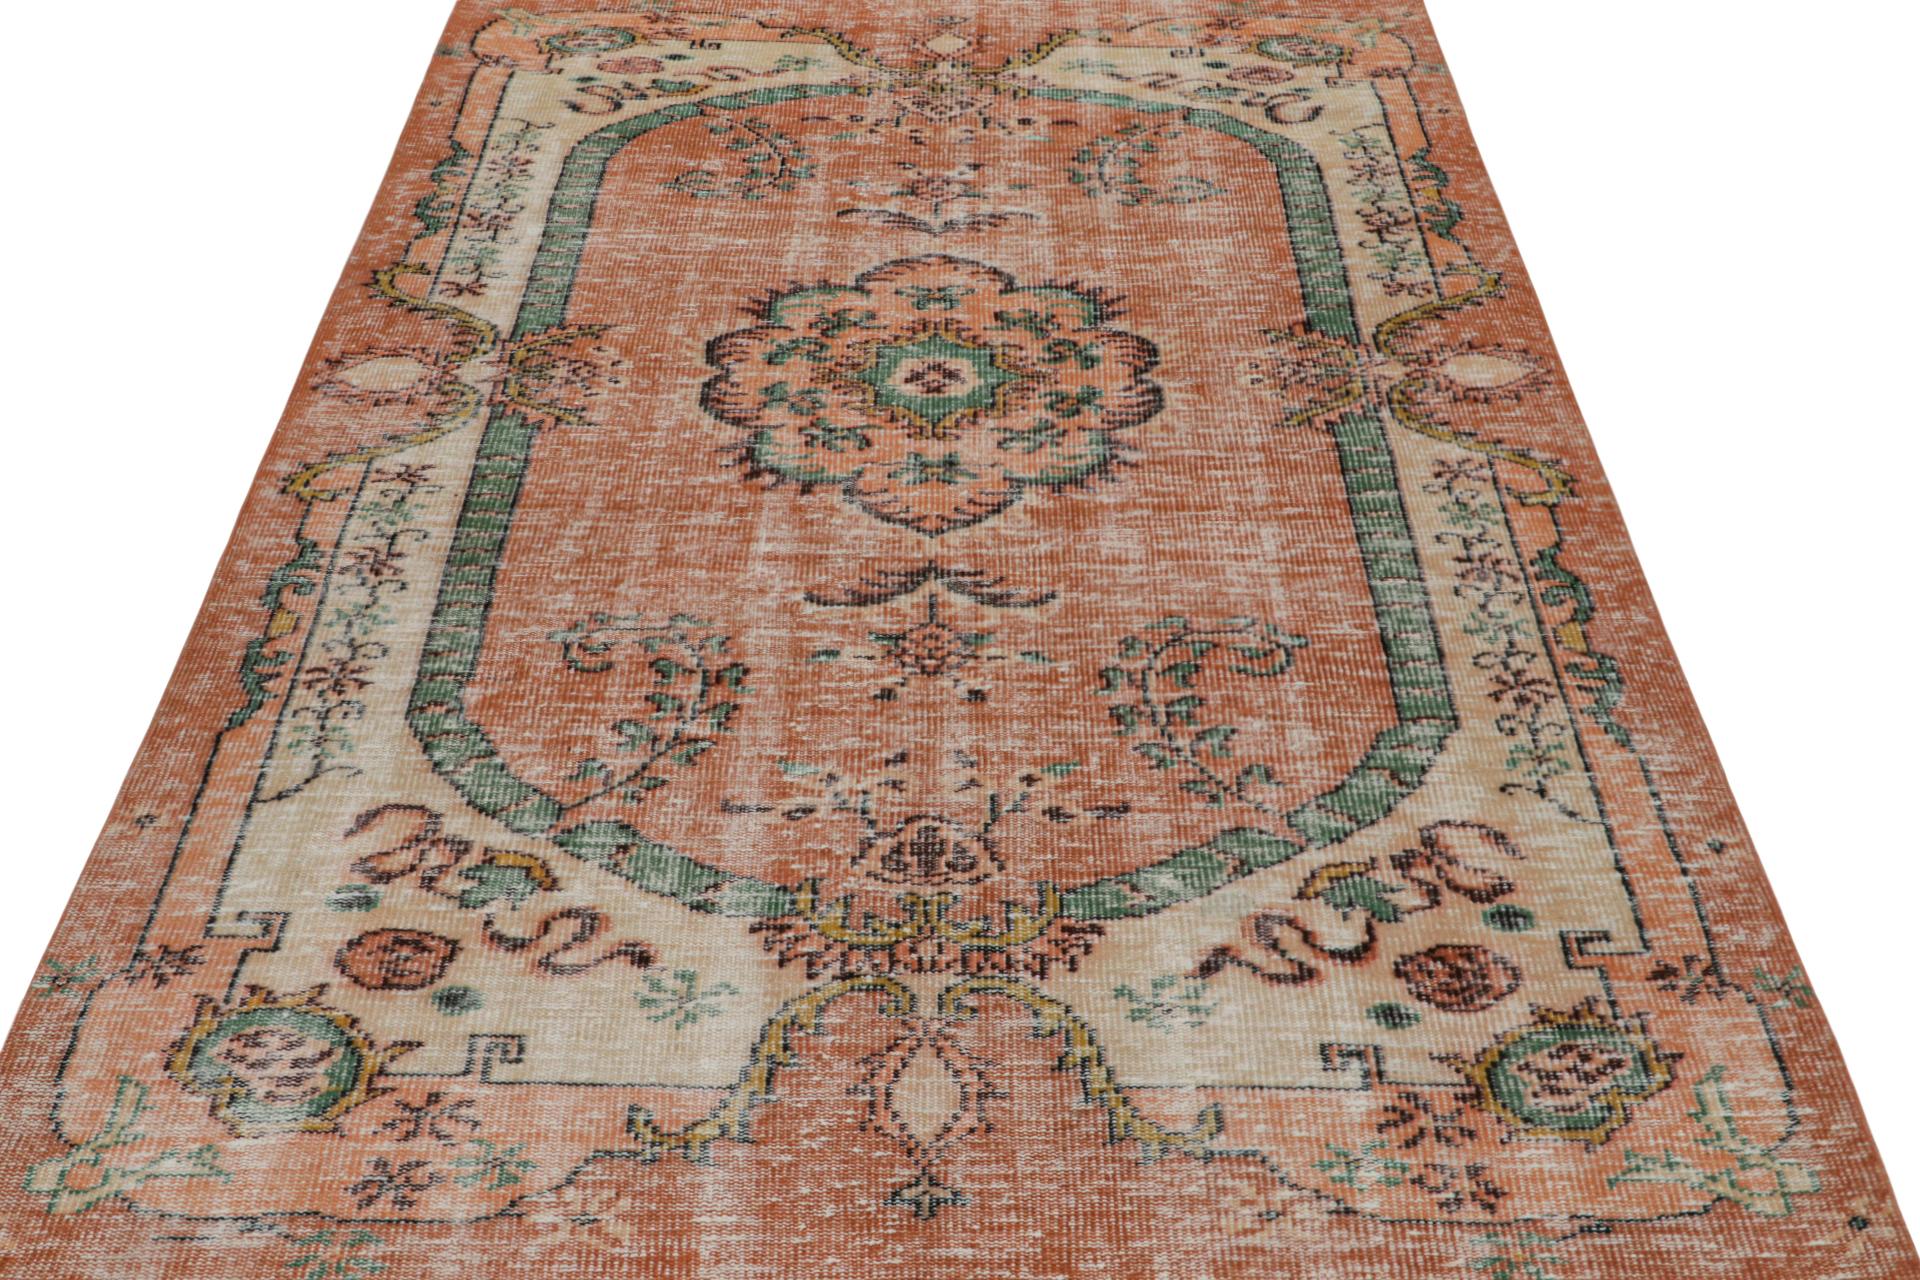 Turkish Vintage European Style Rug, with Geometric Floral Patterns, from Rug & Kilim For Sale